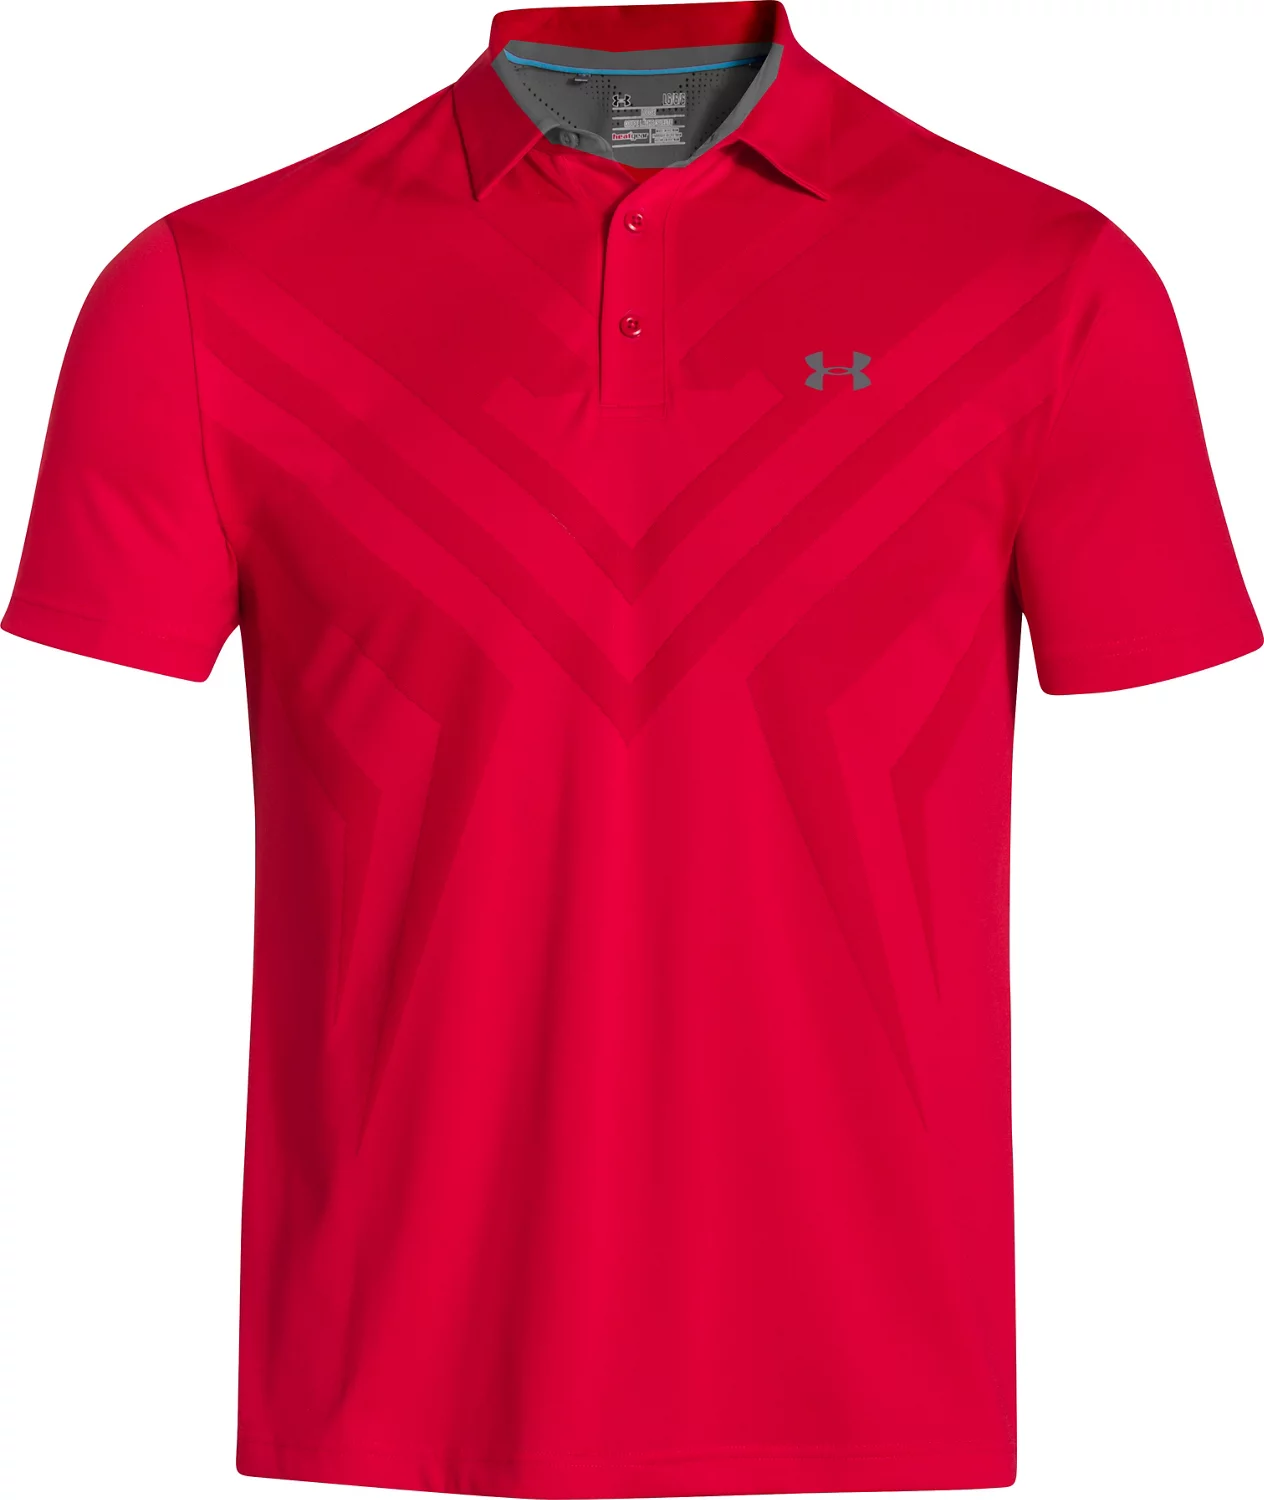 under armour womens polo shirts